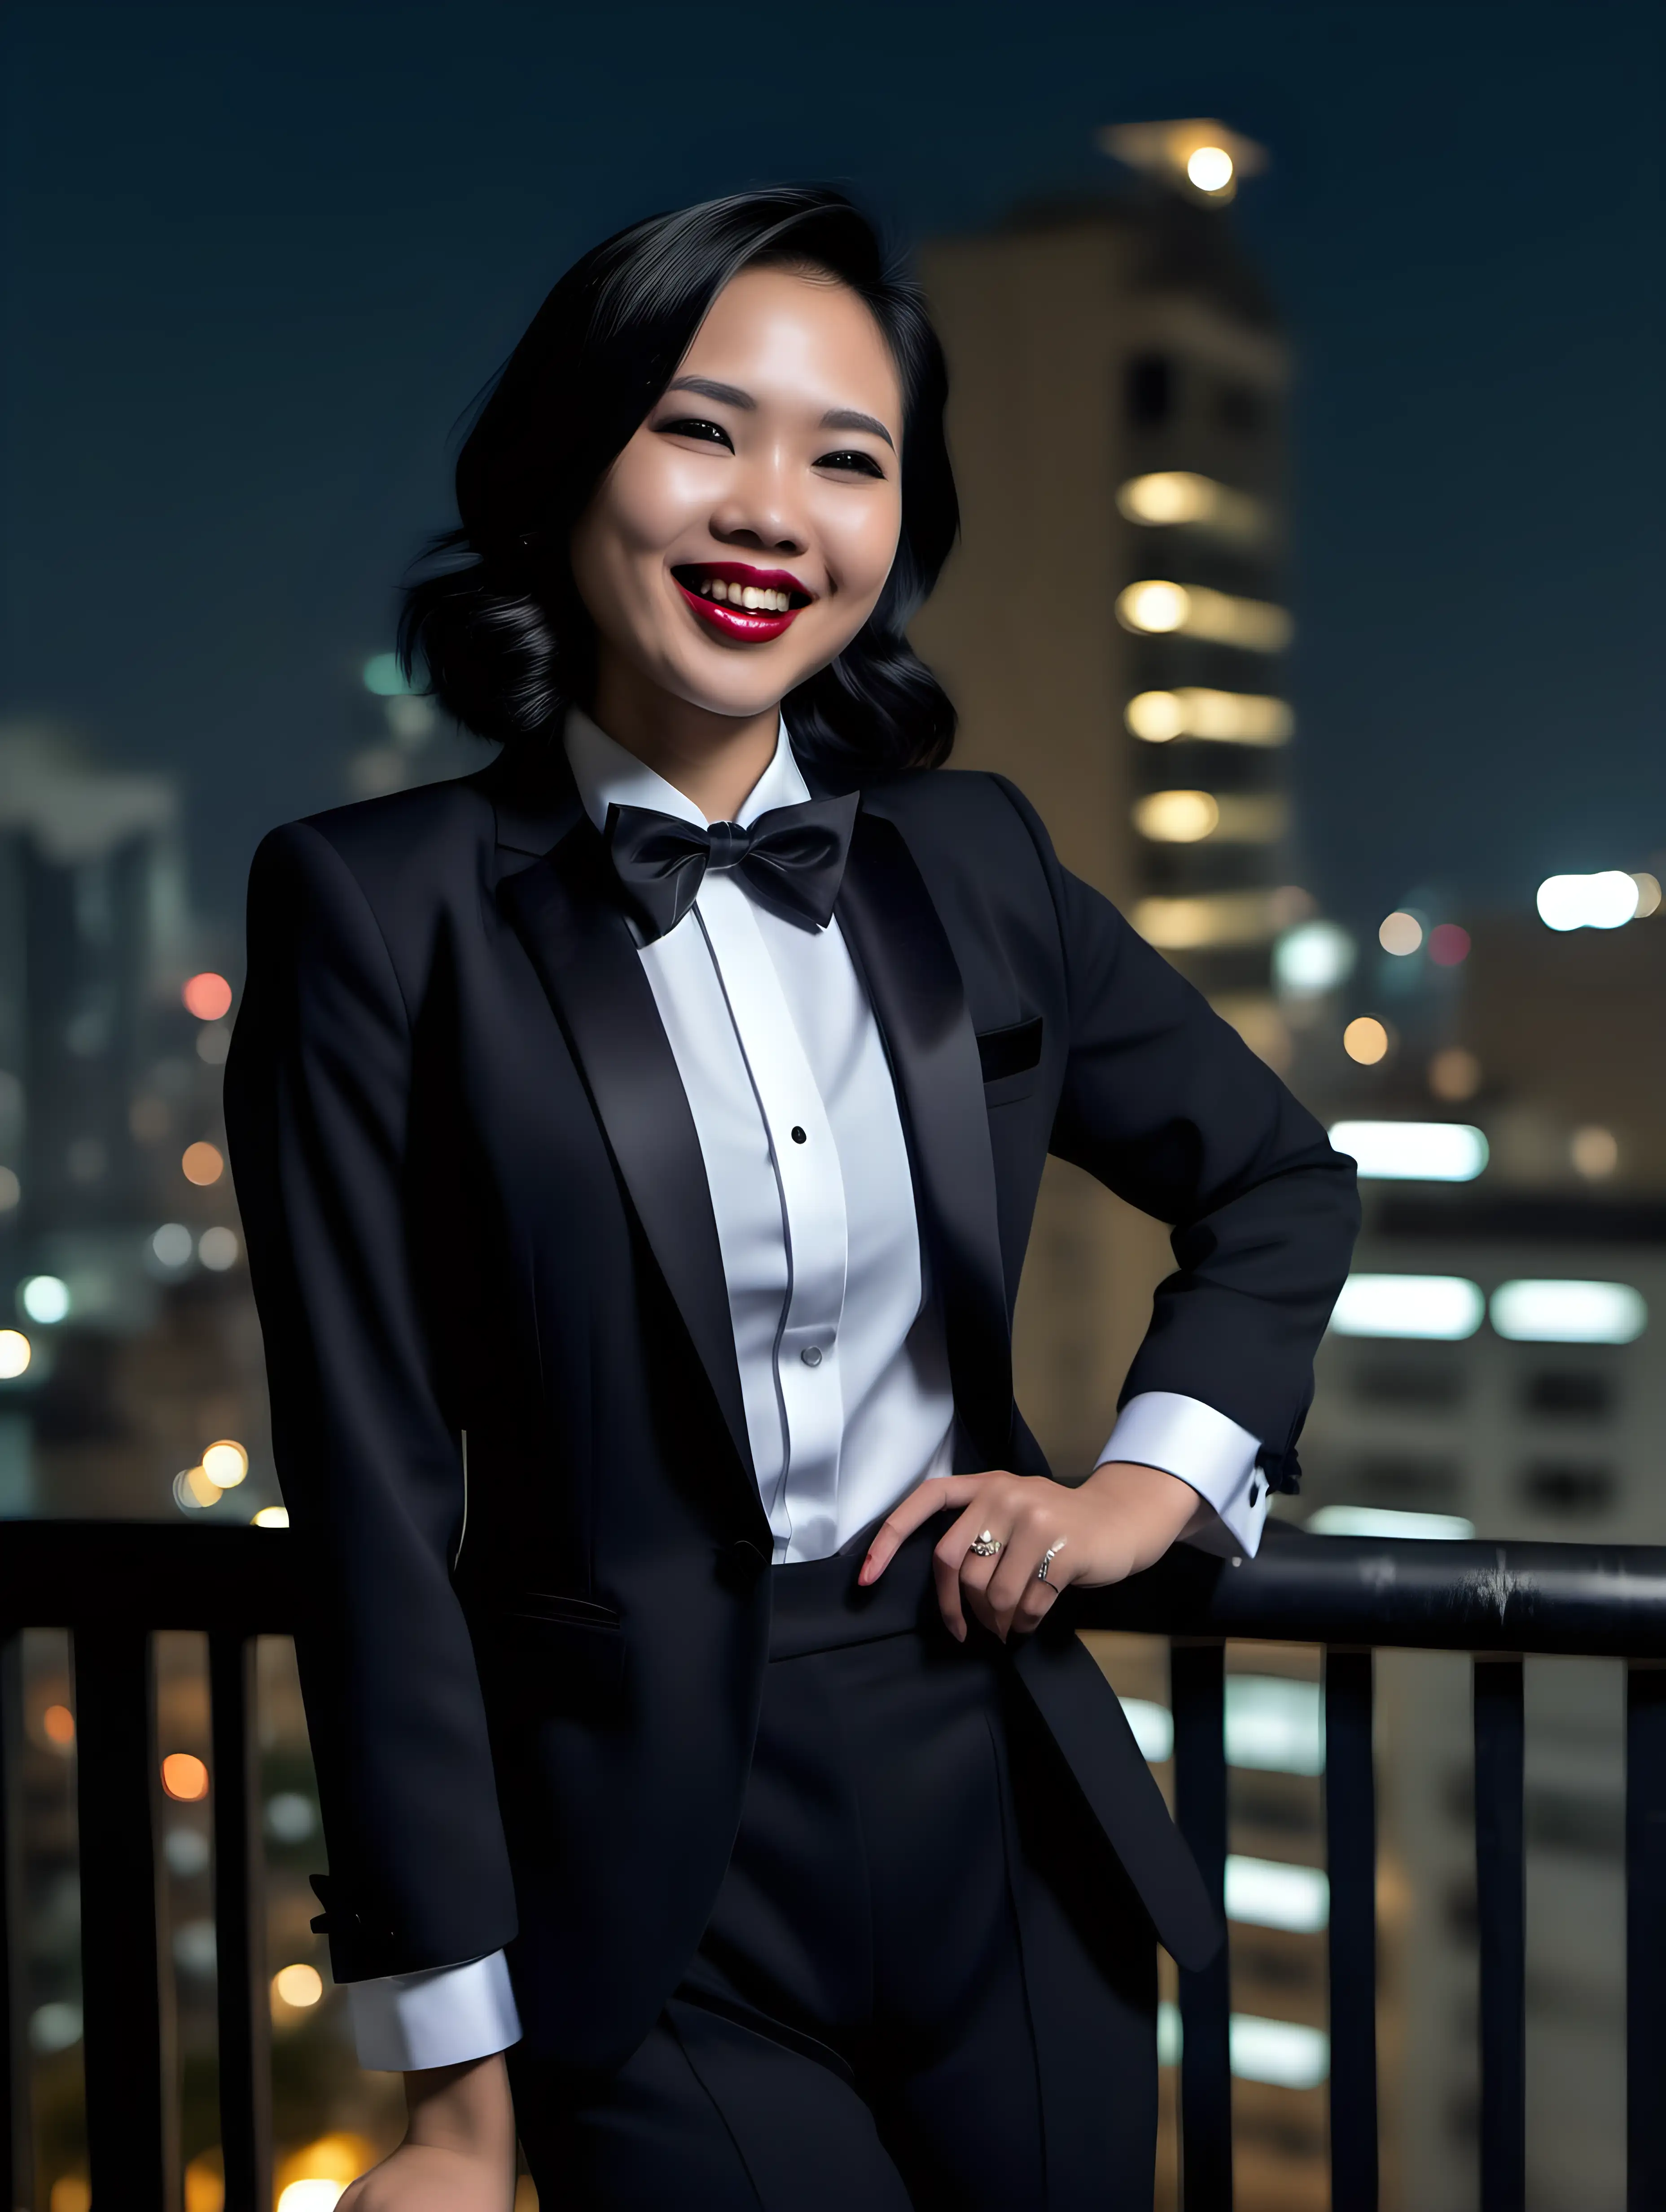 30 year old smiling and laughing Vietnamese woman with shoulder length black hair and lipstick wearing a tuxedo with a black bow tie. (Her shirt cuffs have cufflinks). Her jacket has a corsage. She is standing on top of a building at night. She is facing forward. Her hands are in her pants pockets.